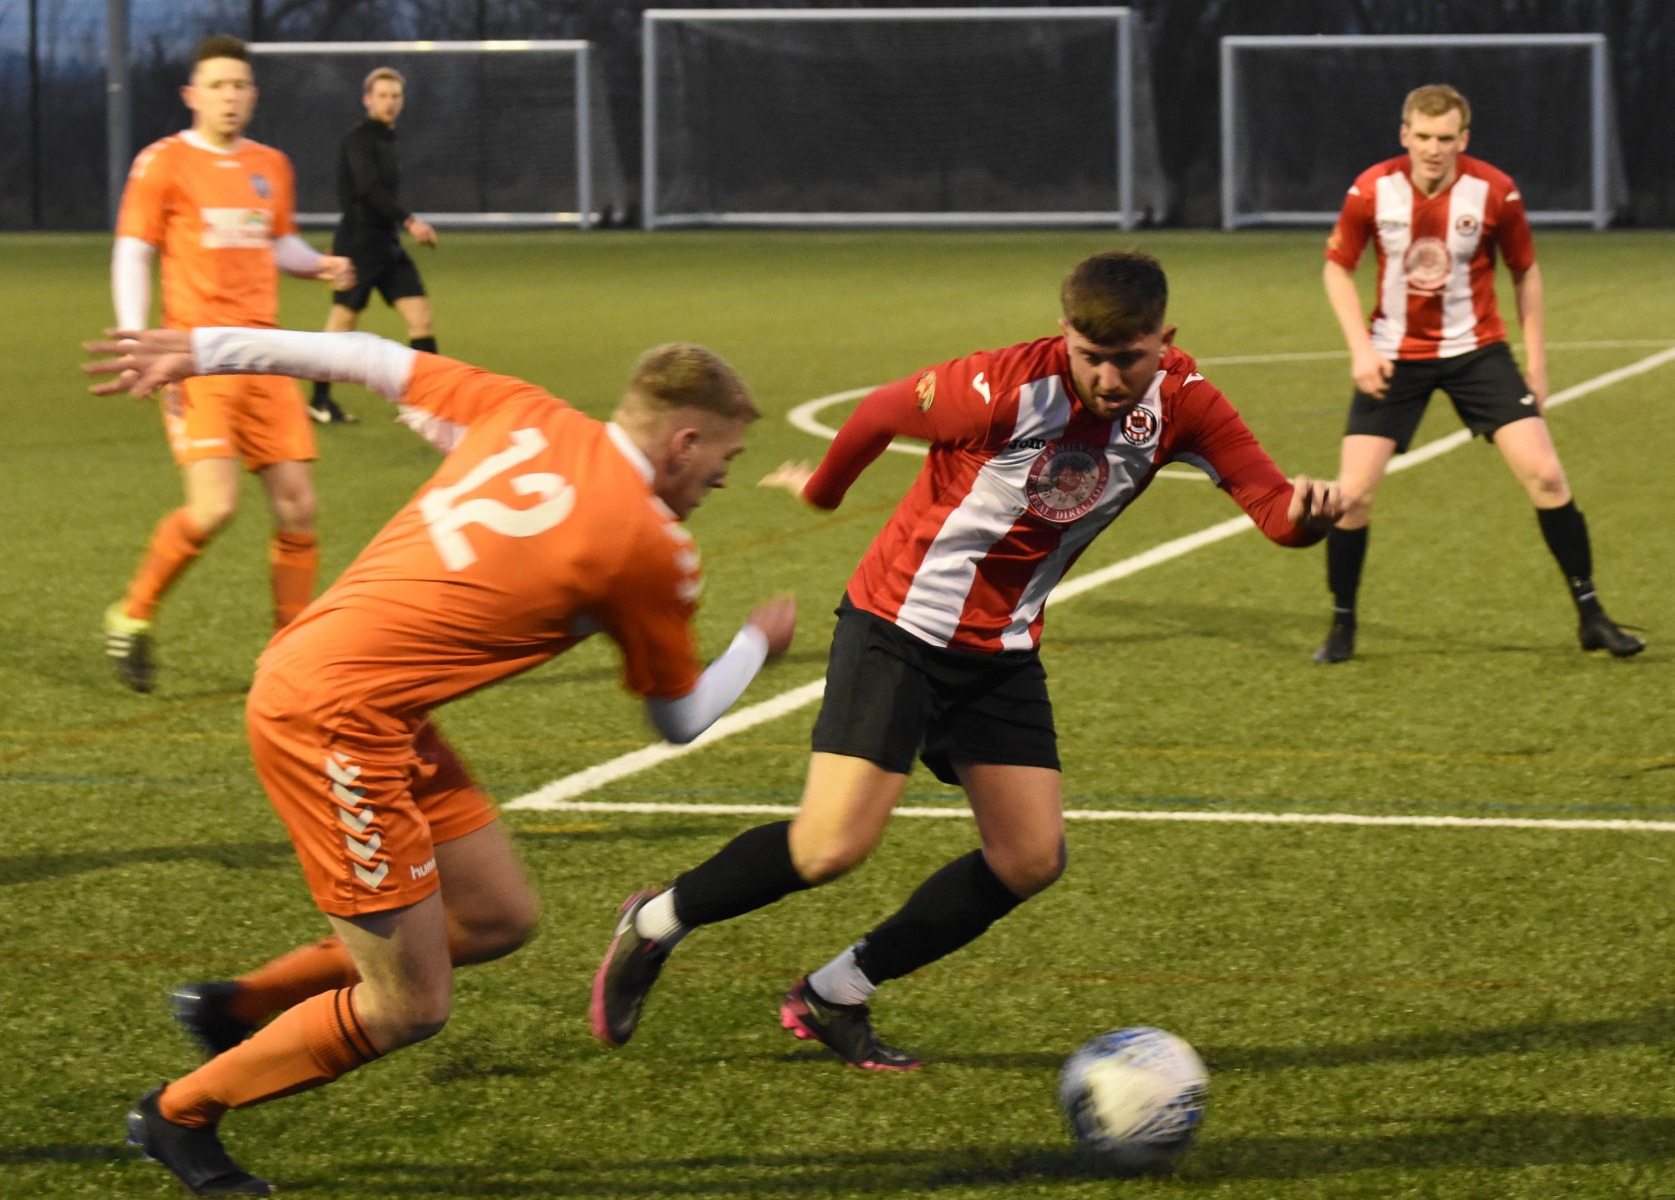 Sunderland West End 1-1 Heaton Stan – Match Report, Photos and Video